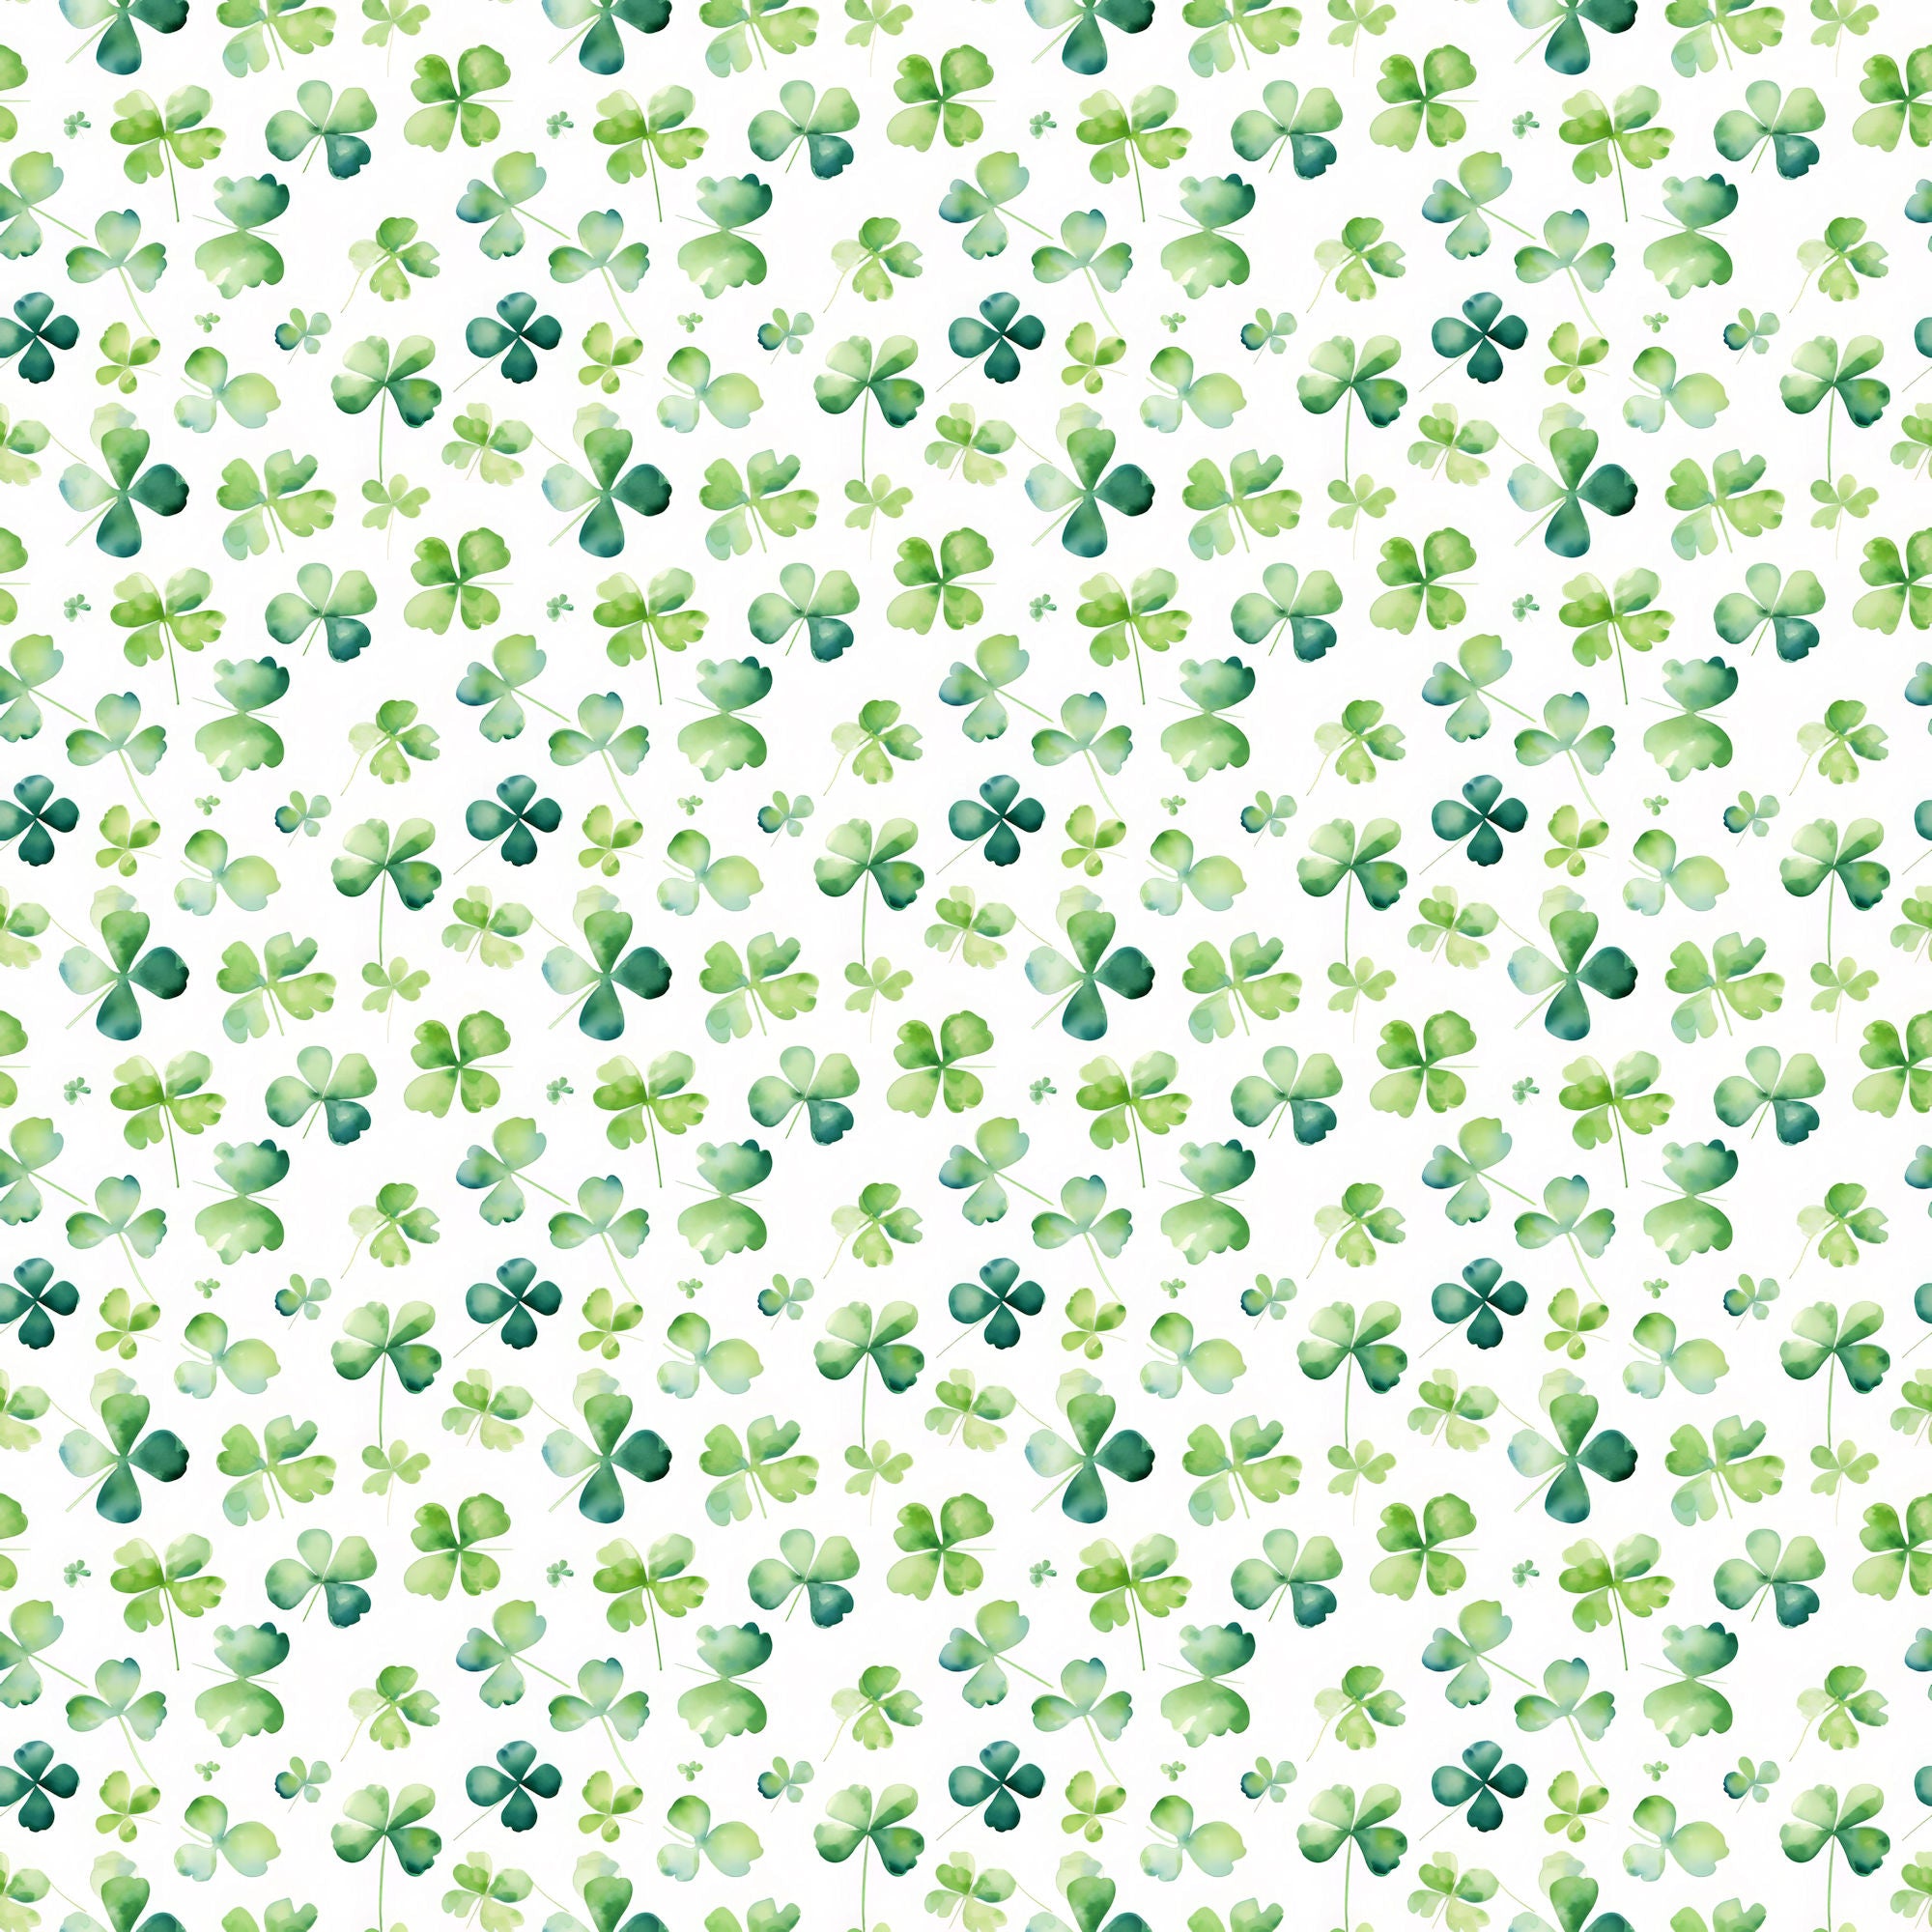 St. Patrick's Day Collection Cheers! 12 x 12 Double-Sided Scrapbook Paper by SSC Designs